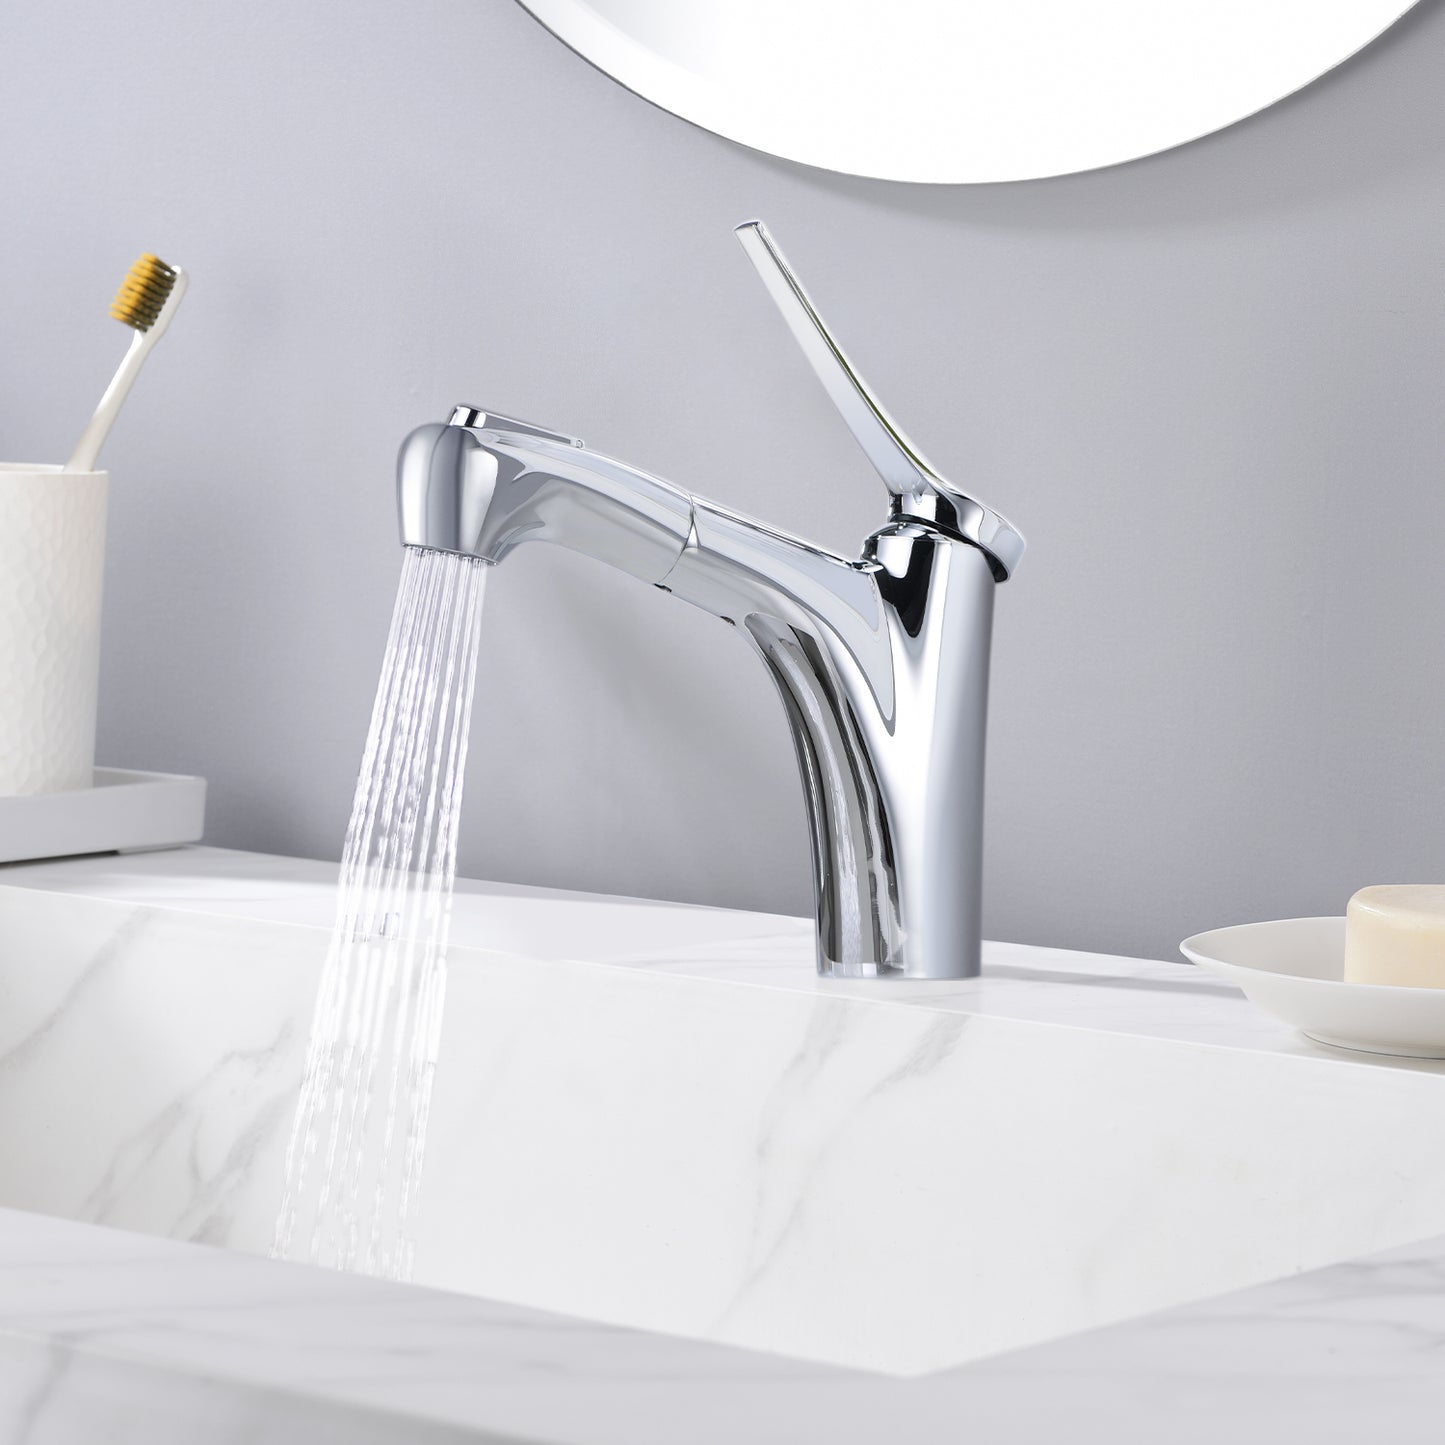 MP-41003 Pull out the basin faucet